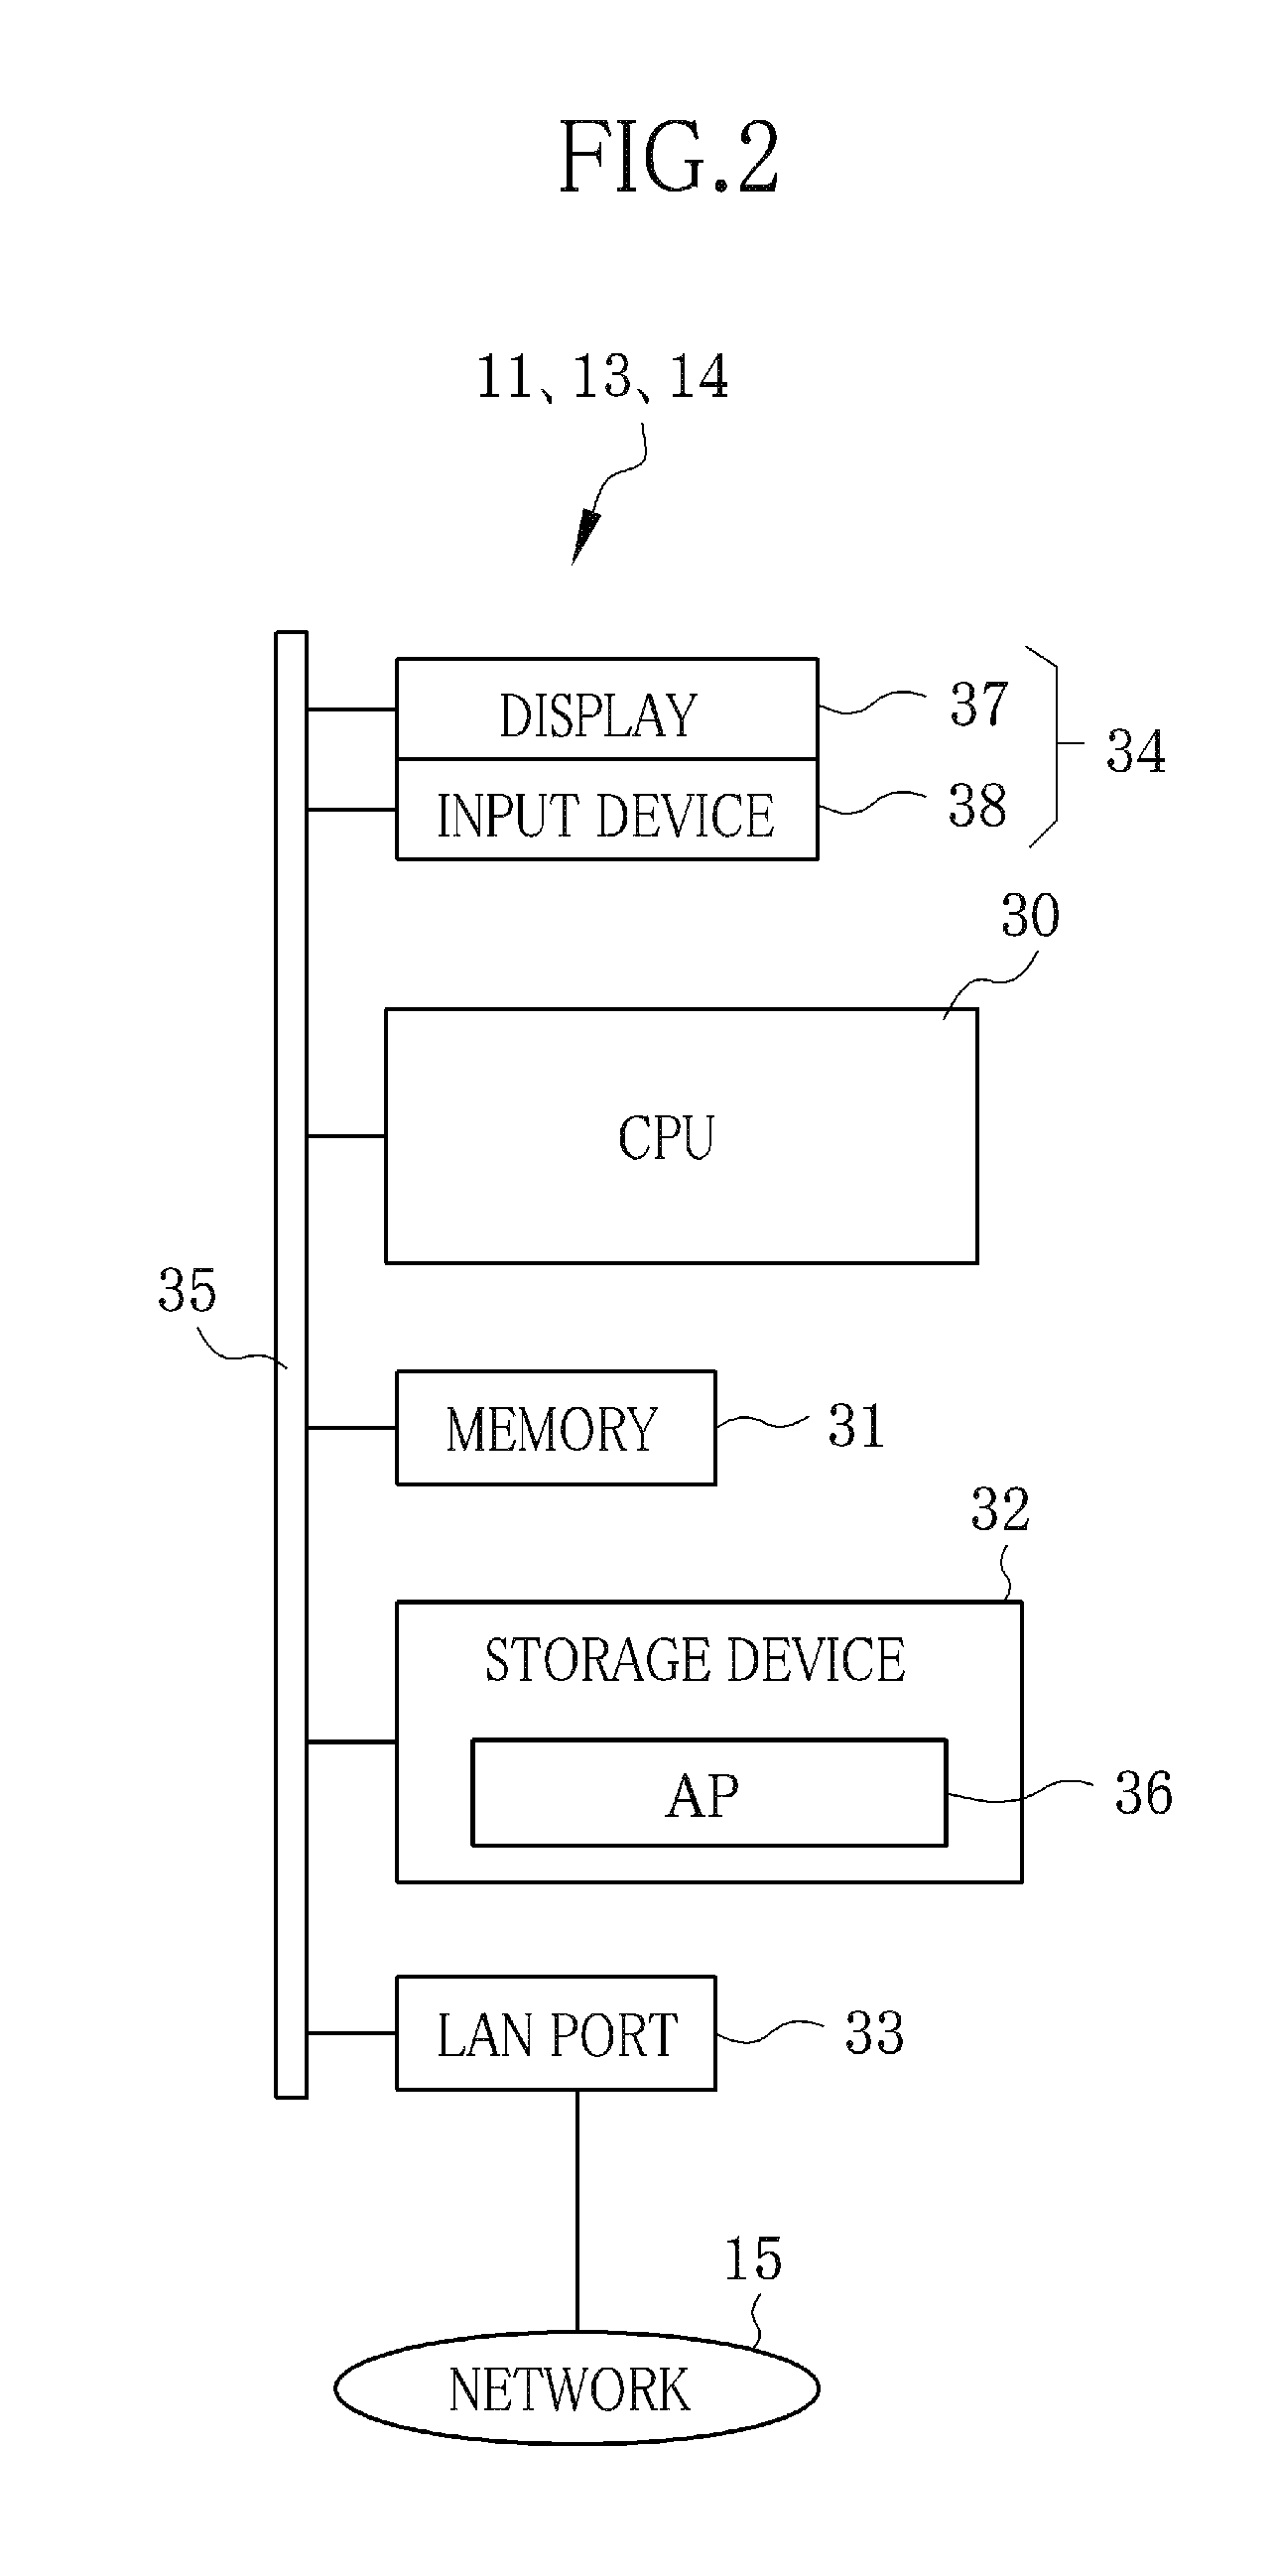 Apparatus, method and program for assisting medical report creation and providing medical information